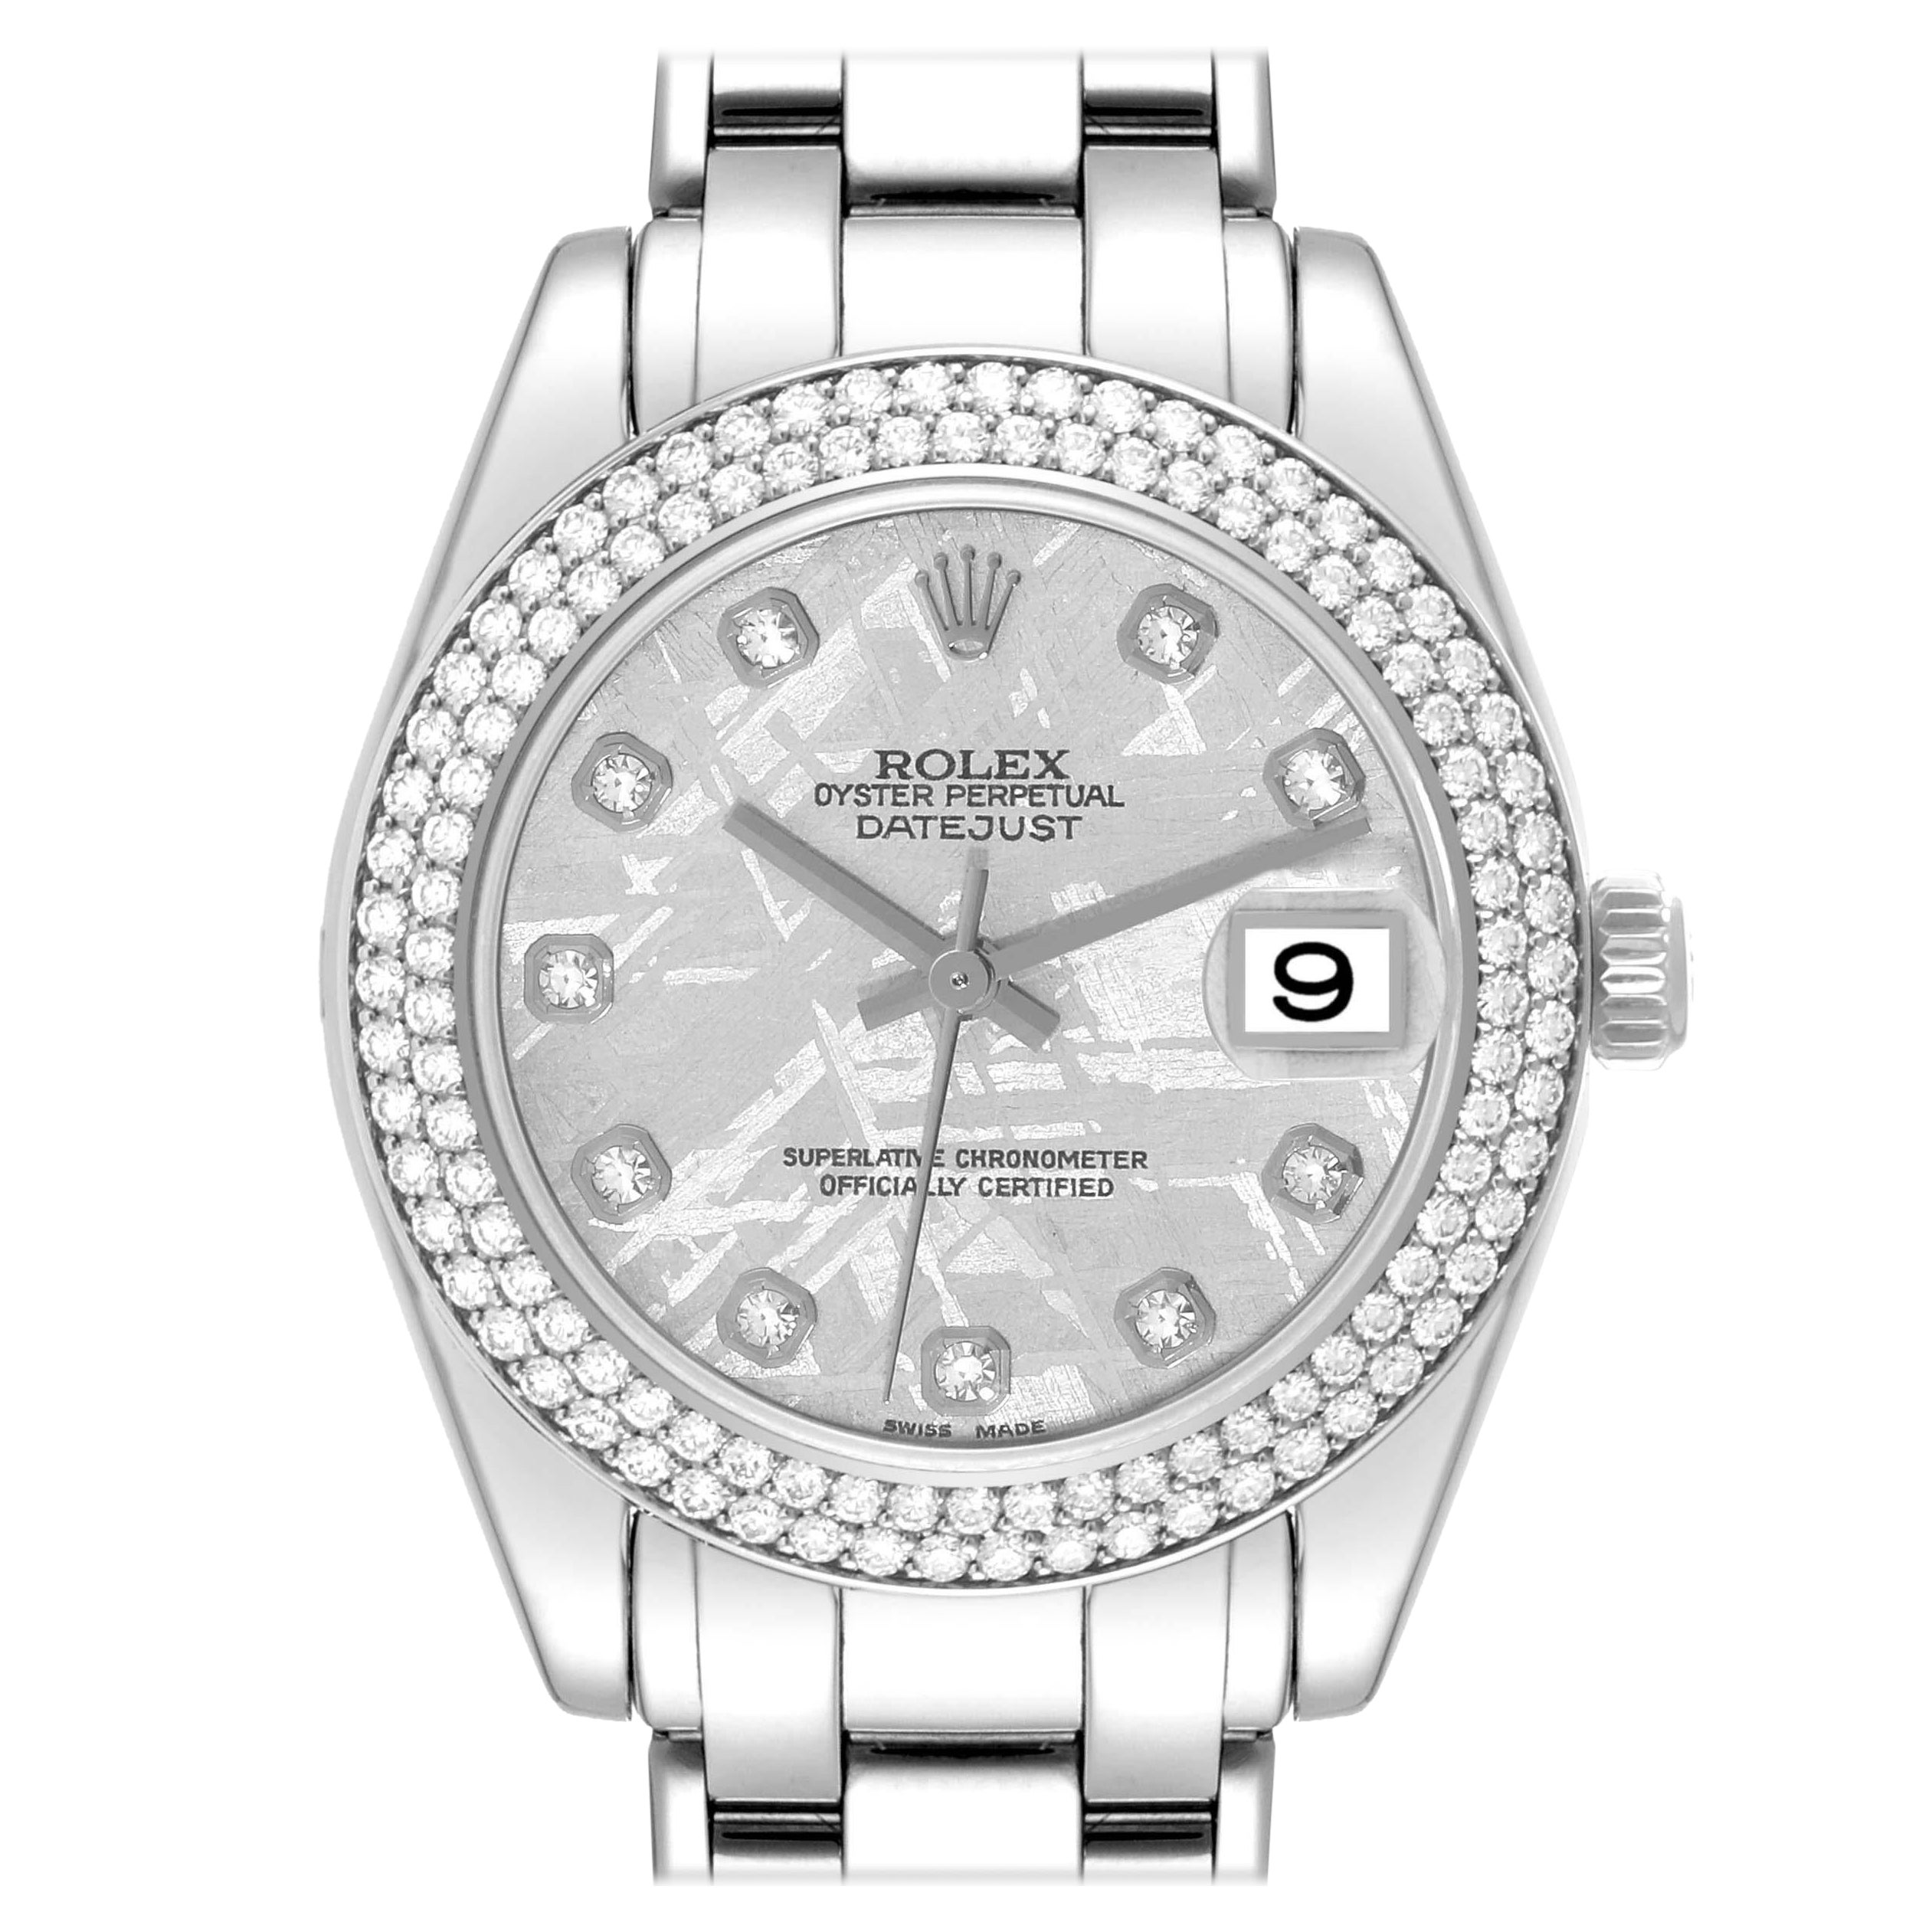 Rolex Pearlmaster 34 White Gold Meteorite Dial Diamond Ladies Watch 81339 For Sale